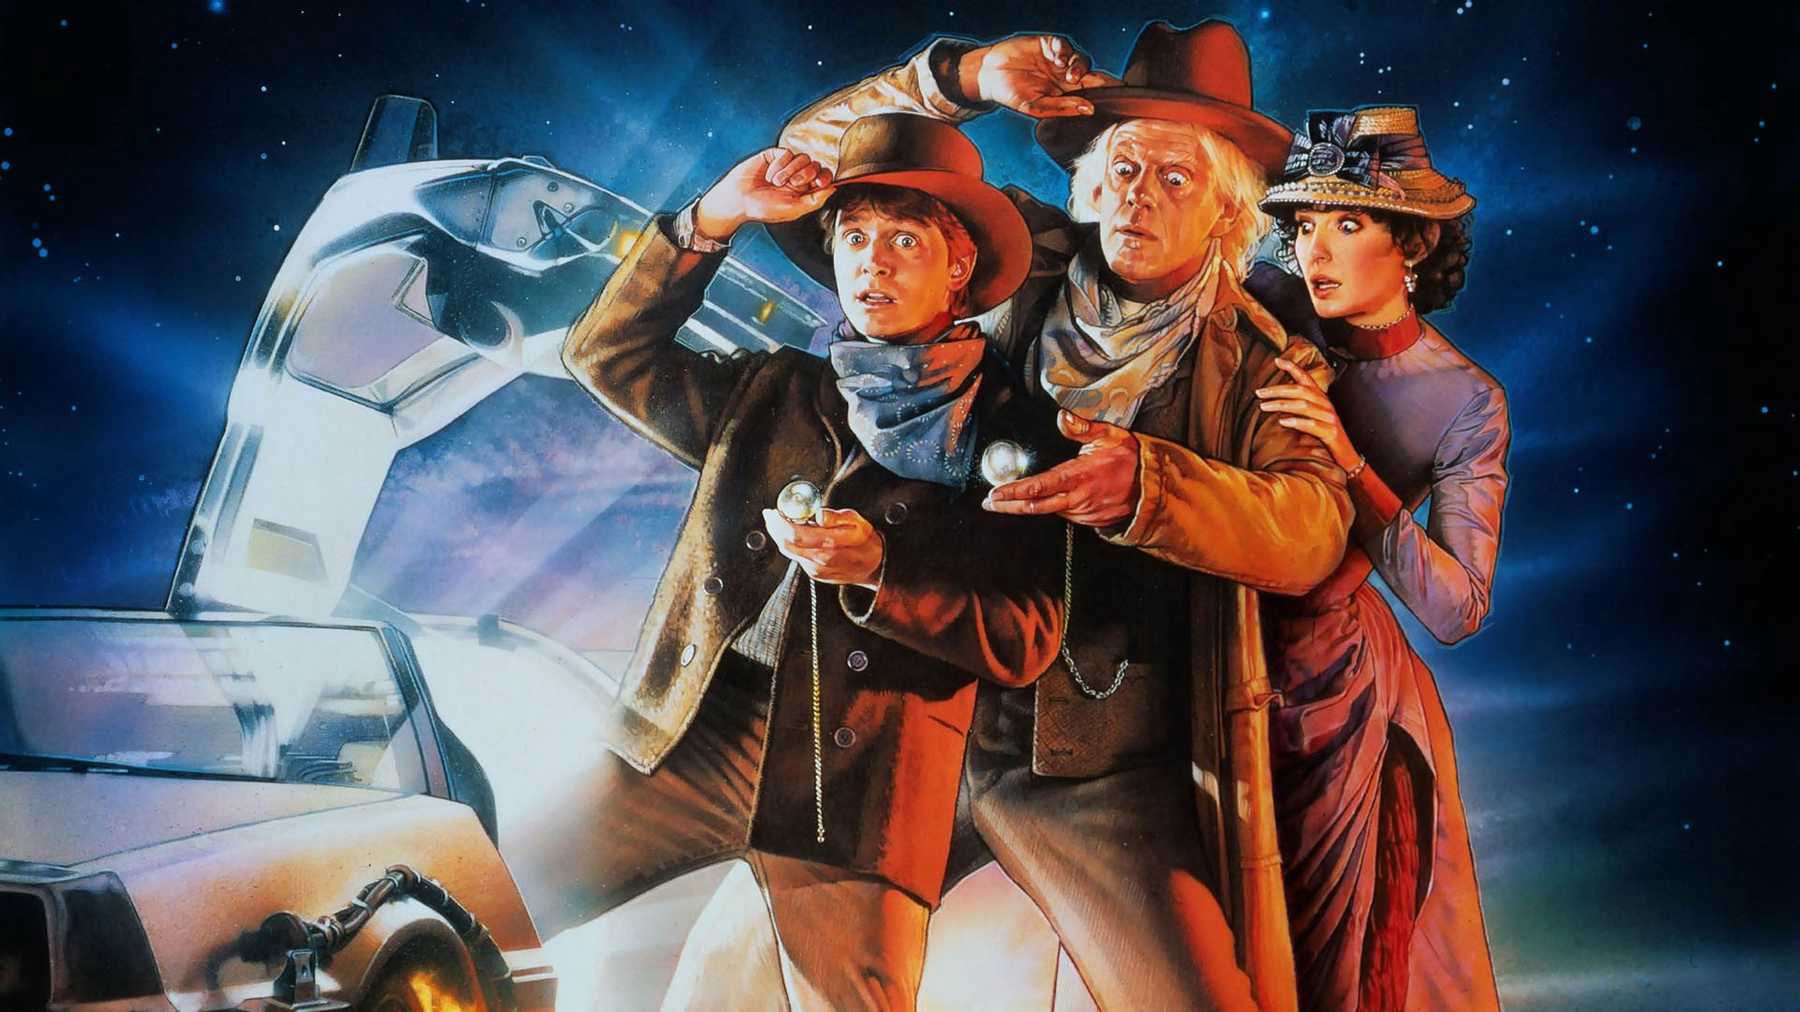 Back to the Future Part III / Back to the Future Part III (1990)